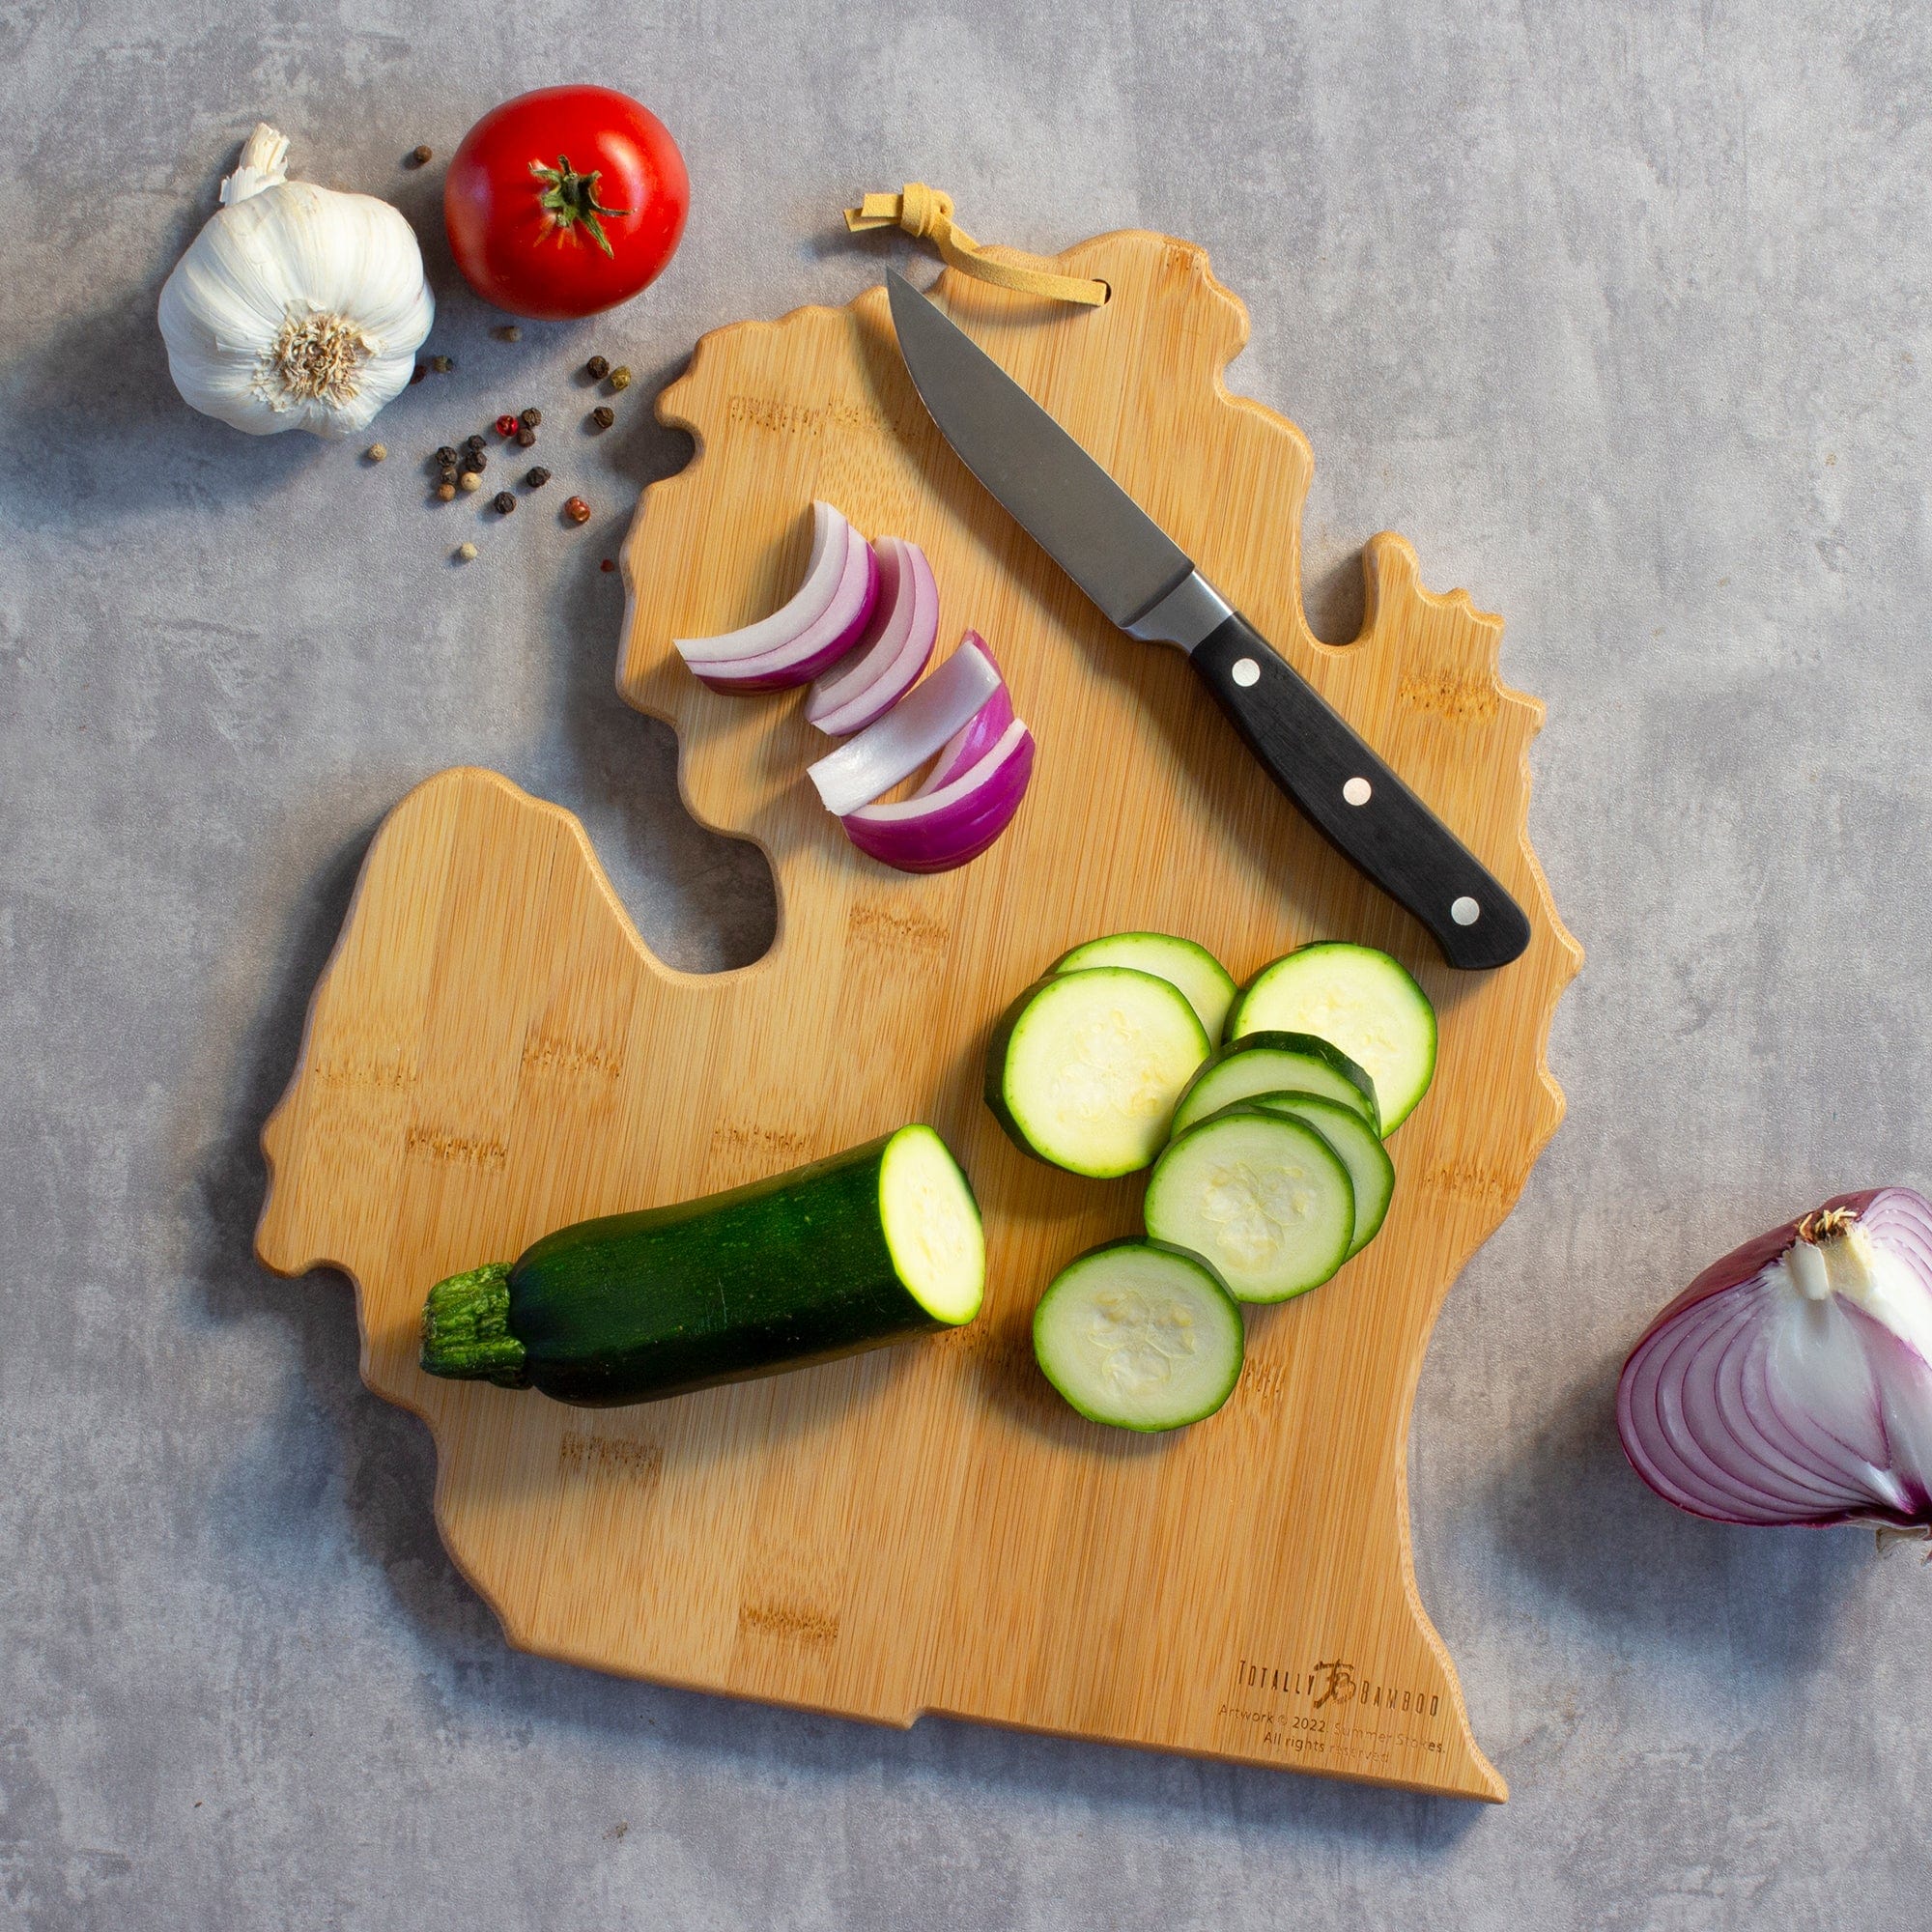 Totally Bamboo Michigan State Shaped Serving and Cutting Board with Artwork by Summer Stokes